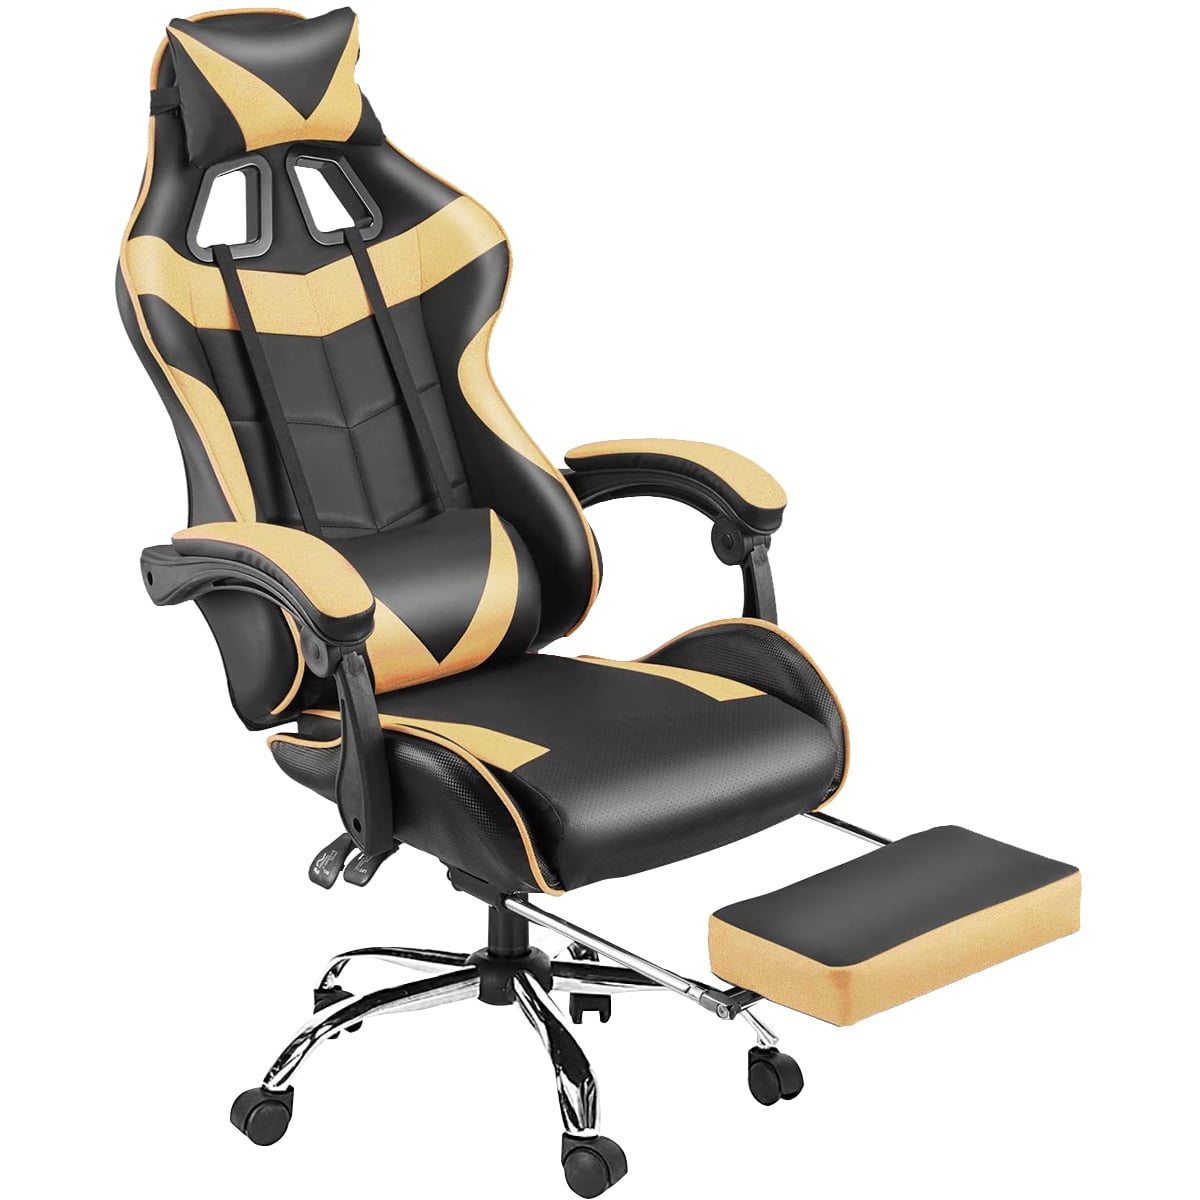 Details about   Computer Gaming Chair PU Leather Recliner Office Desk Seat Swivel with Footrest 